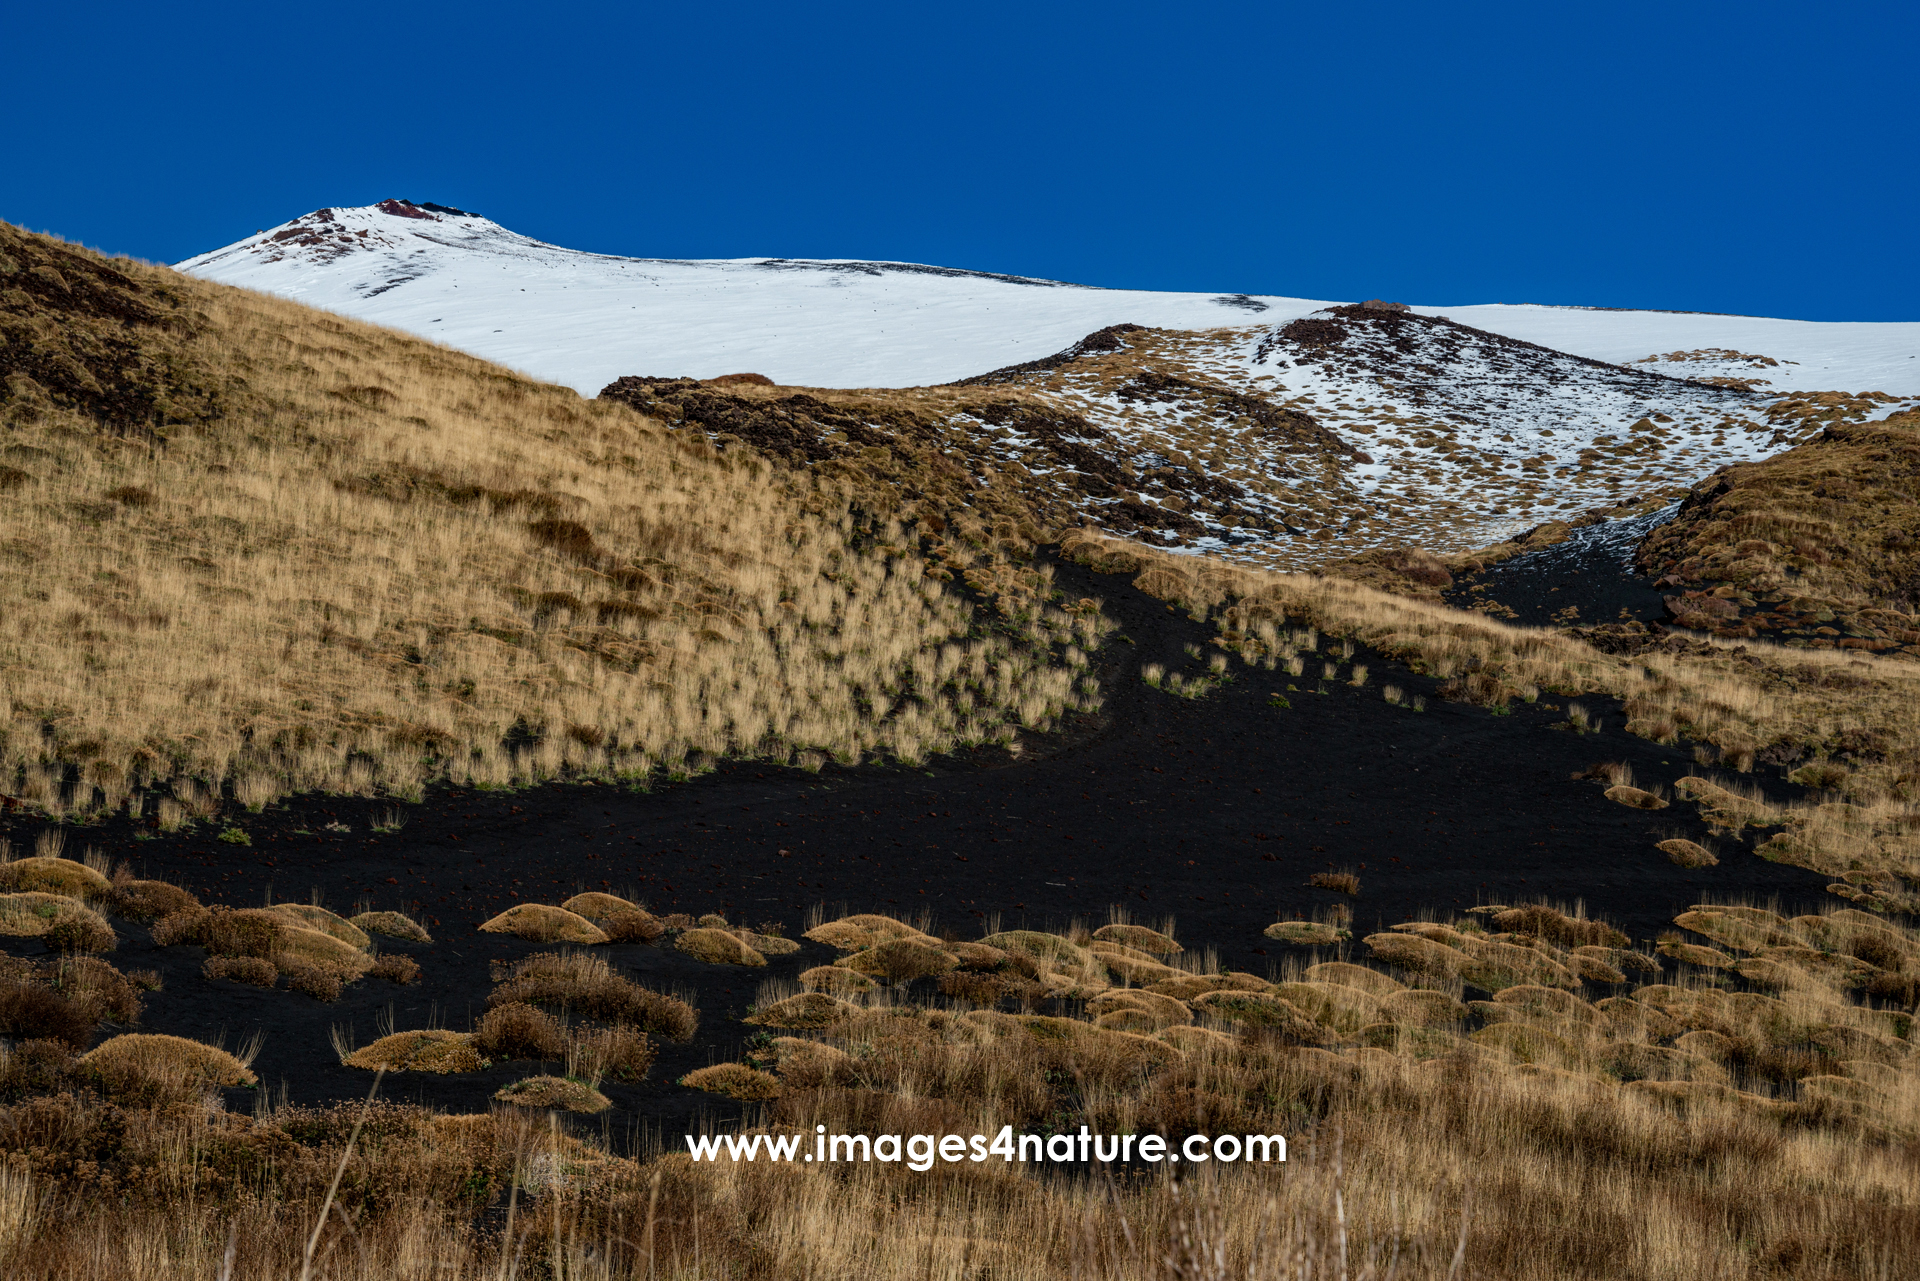 Grass covered black lava field against blue sky and snowy peak